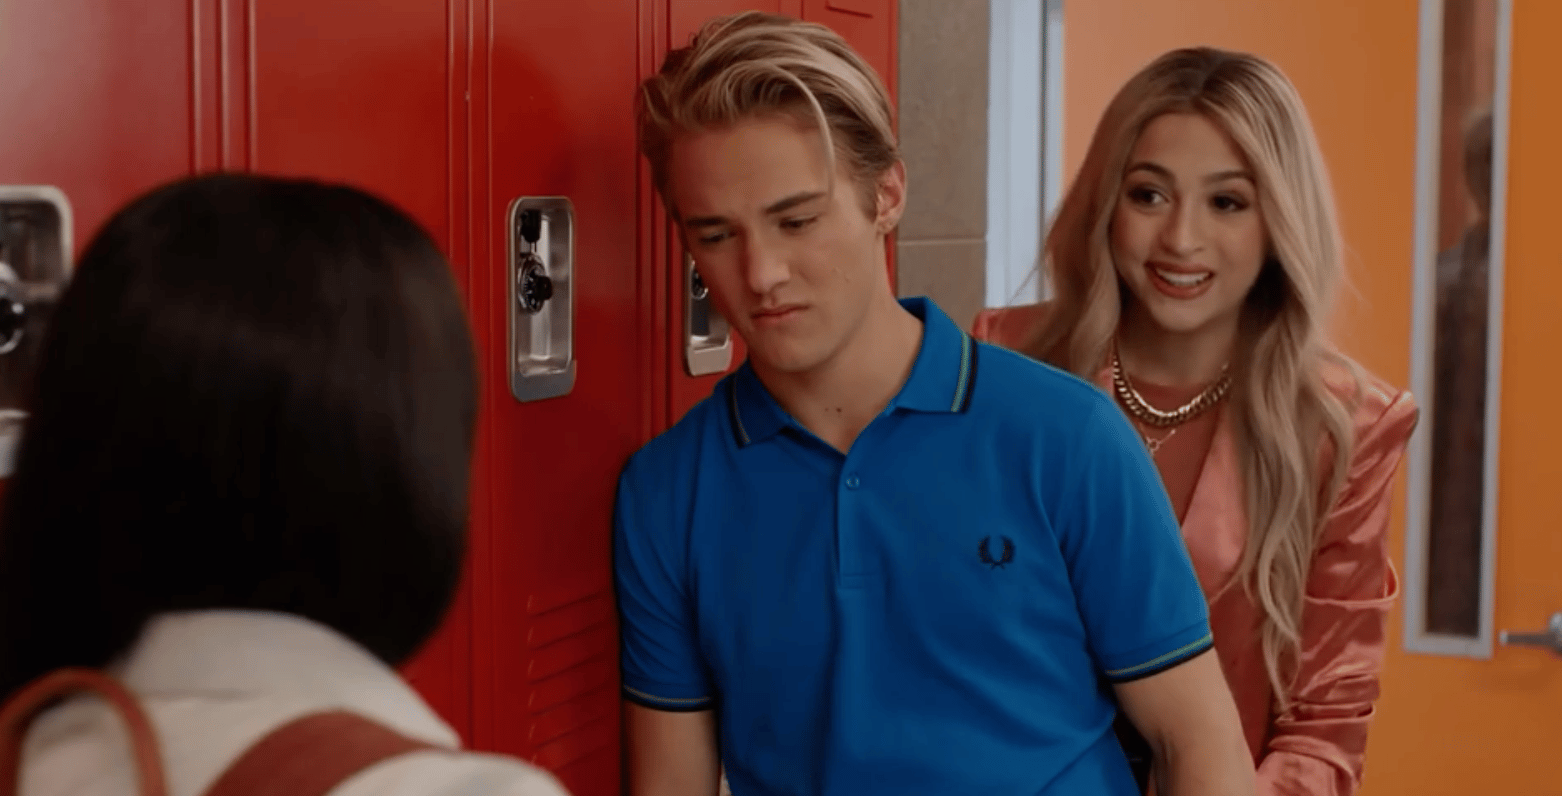 The new 'Saved By the Bell' is actually what we need right now